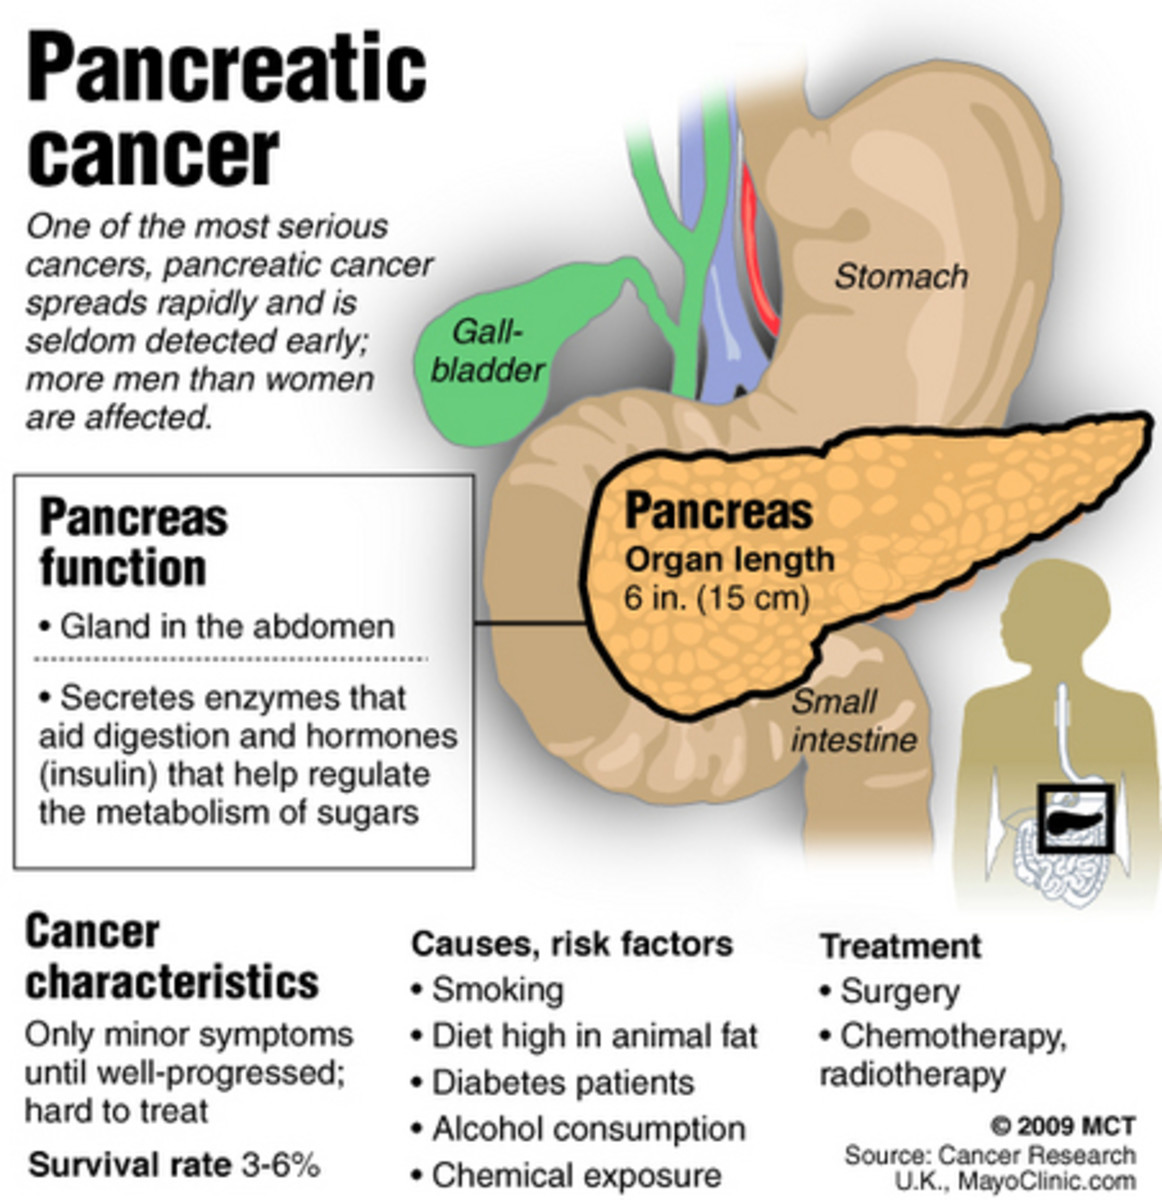 pancreatic cancer is